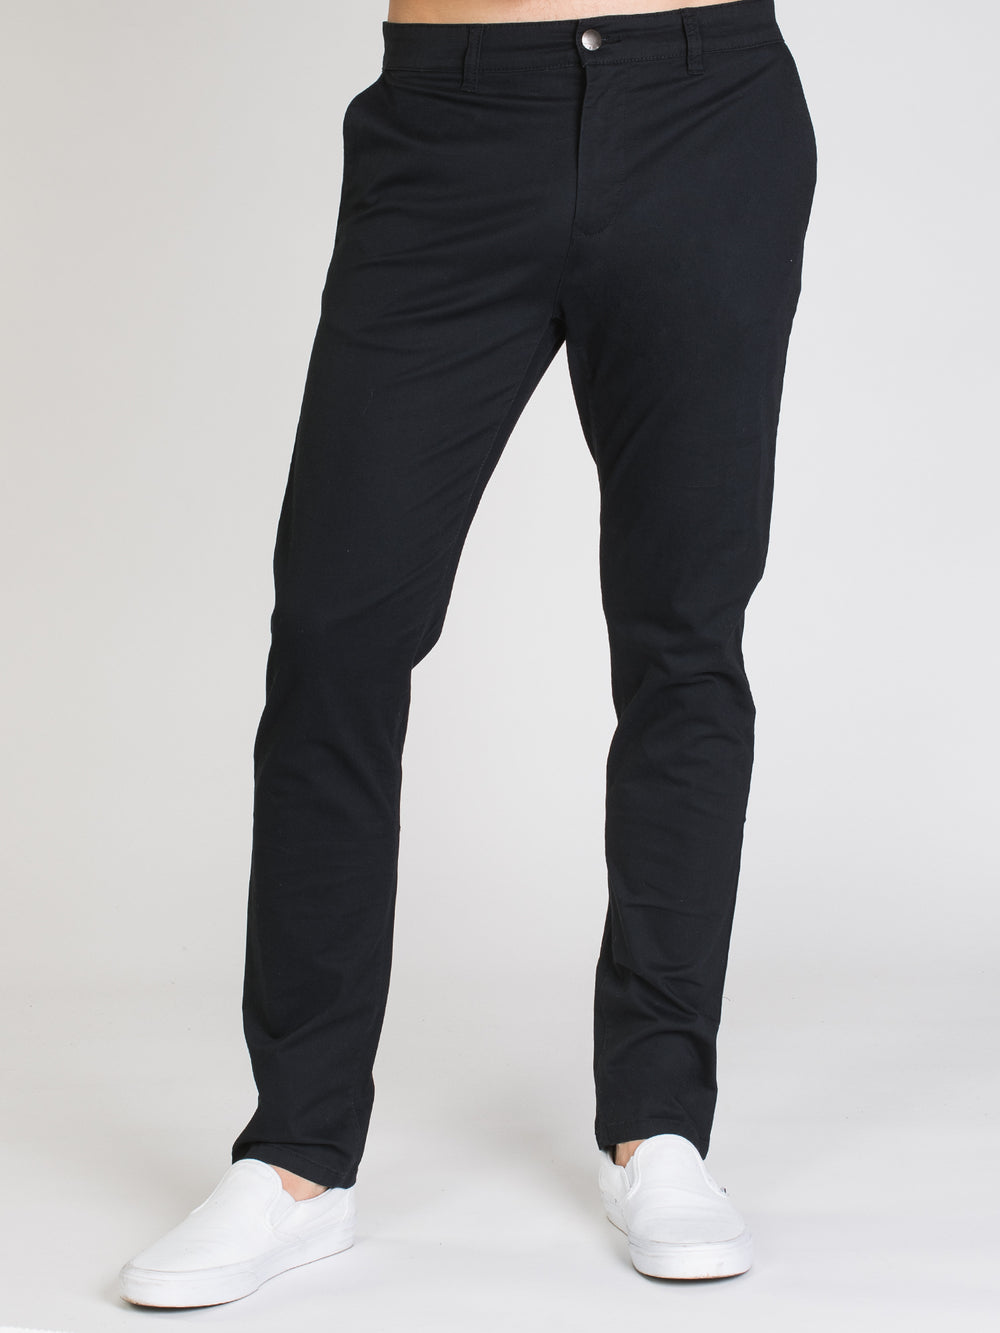 TAINTED SLIM CHINO - NAVY - CLEARANCE